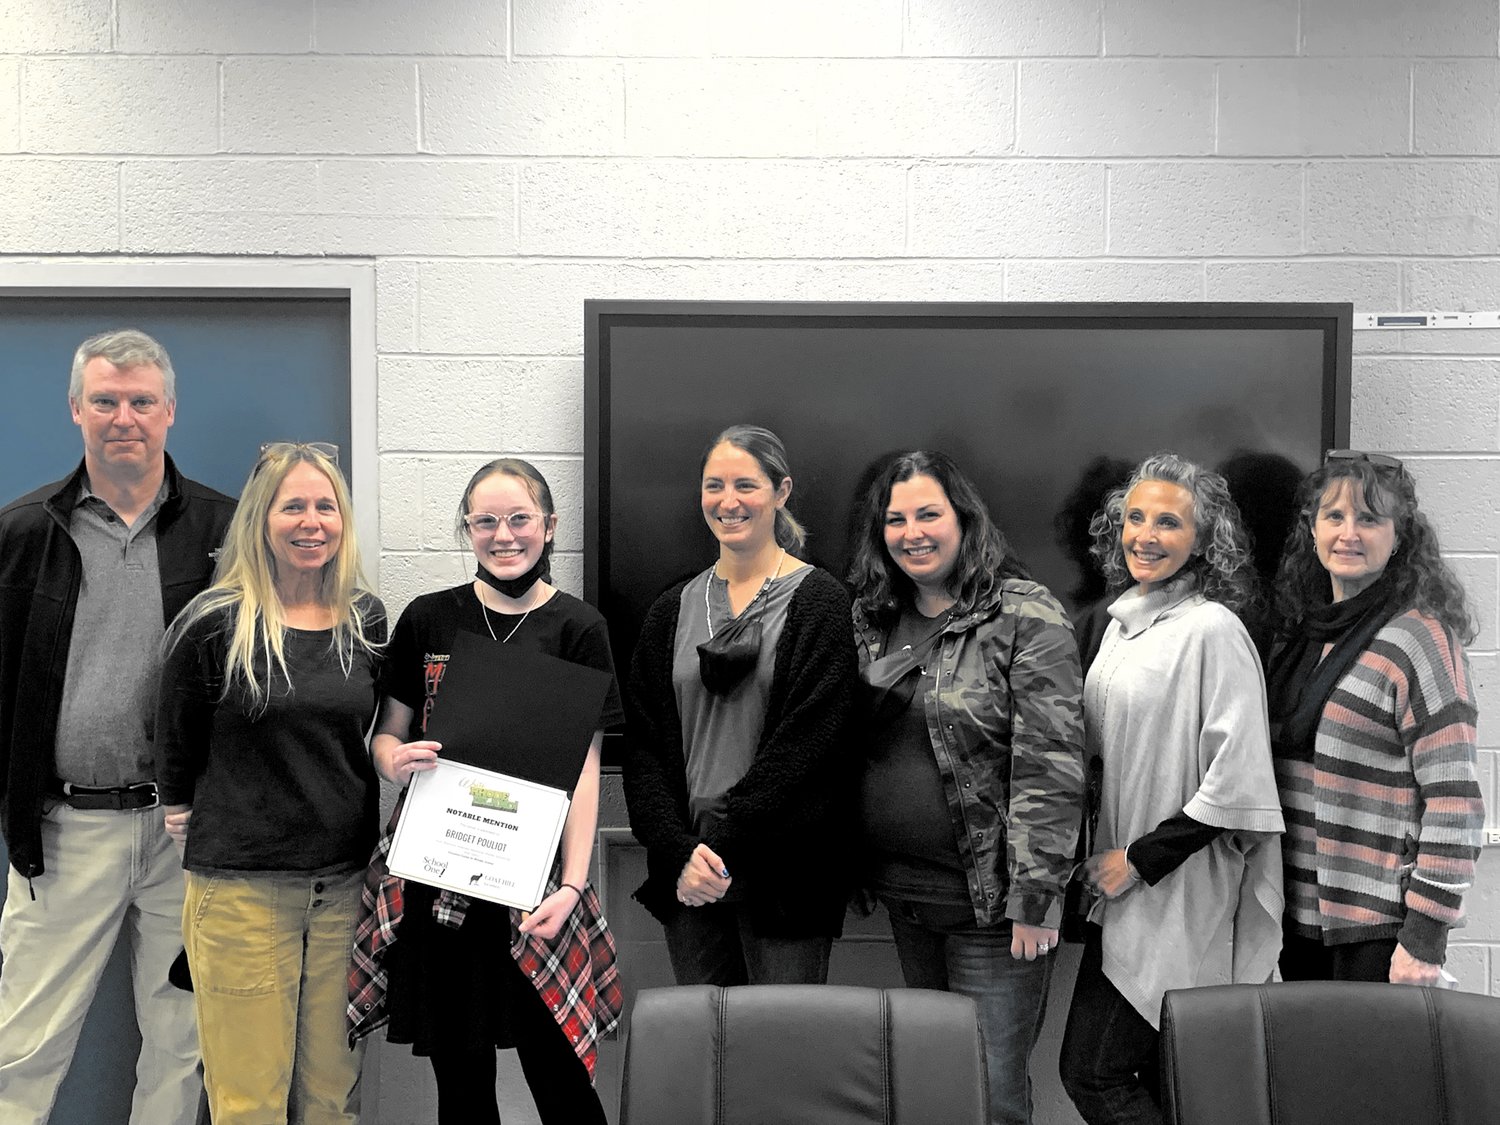 YOUNG AUTHOR: Warwick Vets eighth grader Bridget Pouliot recently received  a notable mention in the Write Rhode Island short fiction competition. Pictured left to right: Peter Stone, Brenda Asplund, Bridget Pouliot, Meredith McSwiggan, Kate Uva, Patricia Bastia, and Pat Burton. (Warwick Beacon photo)